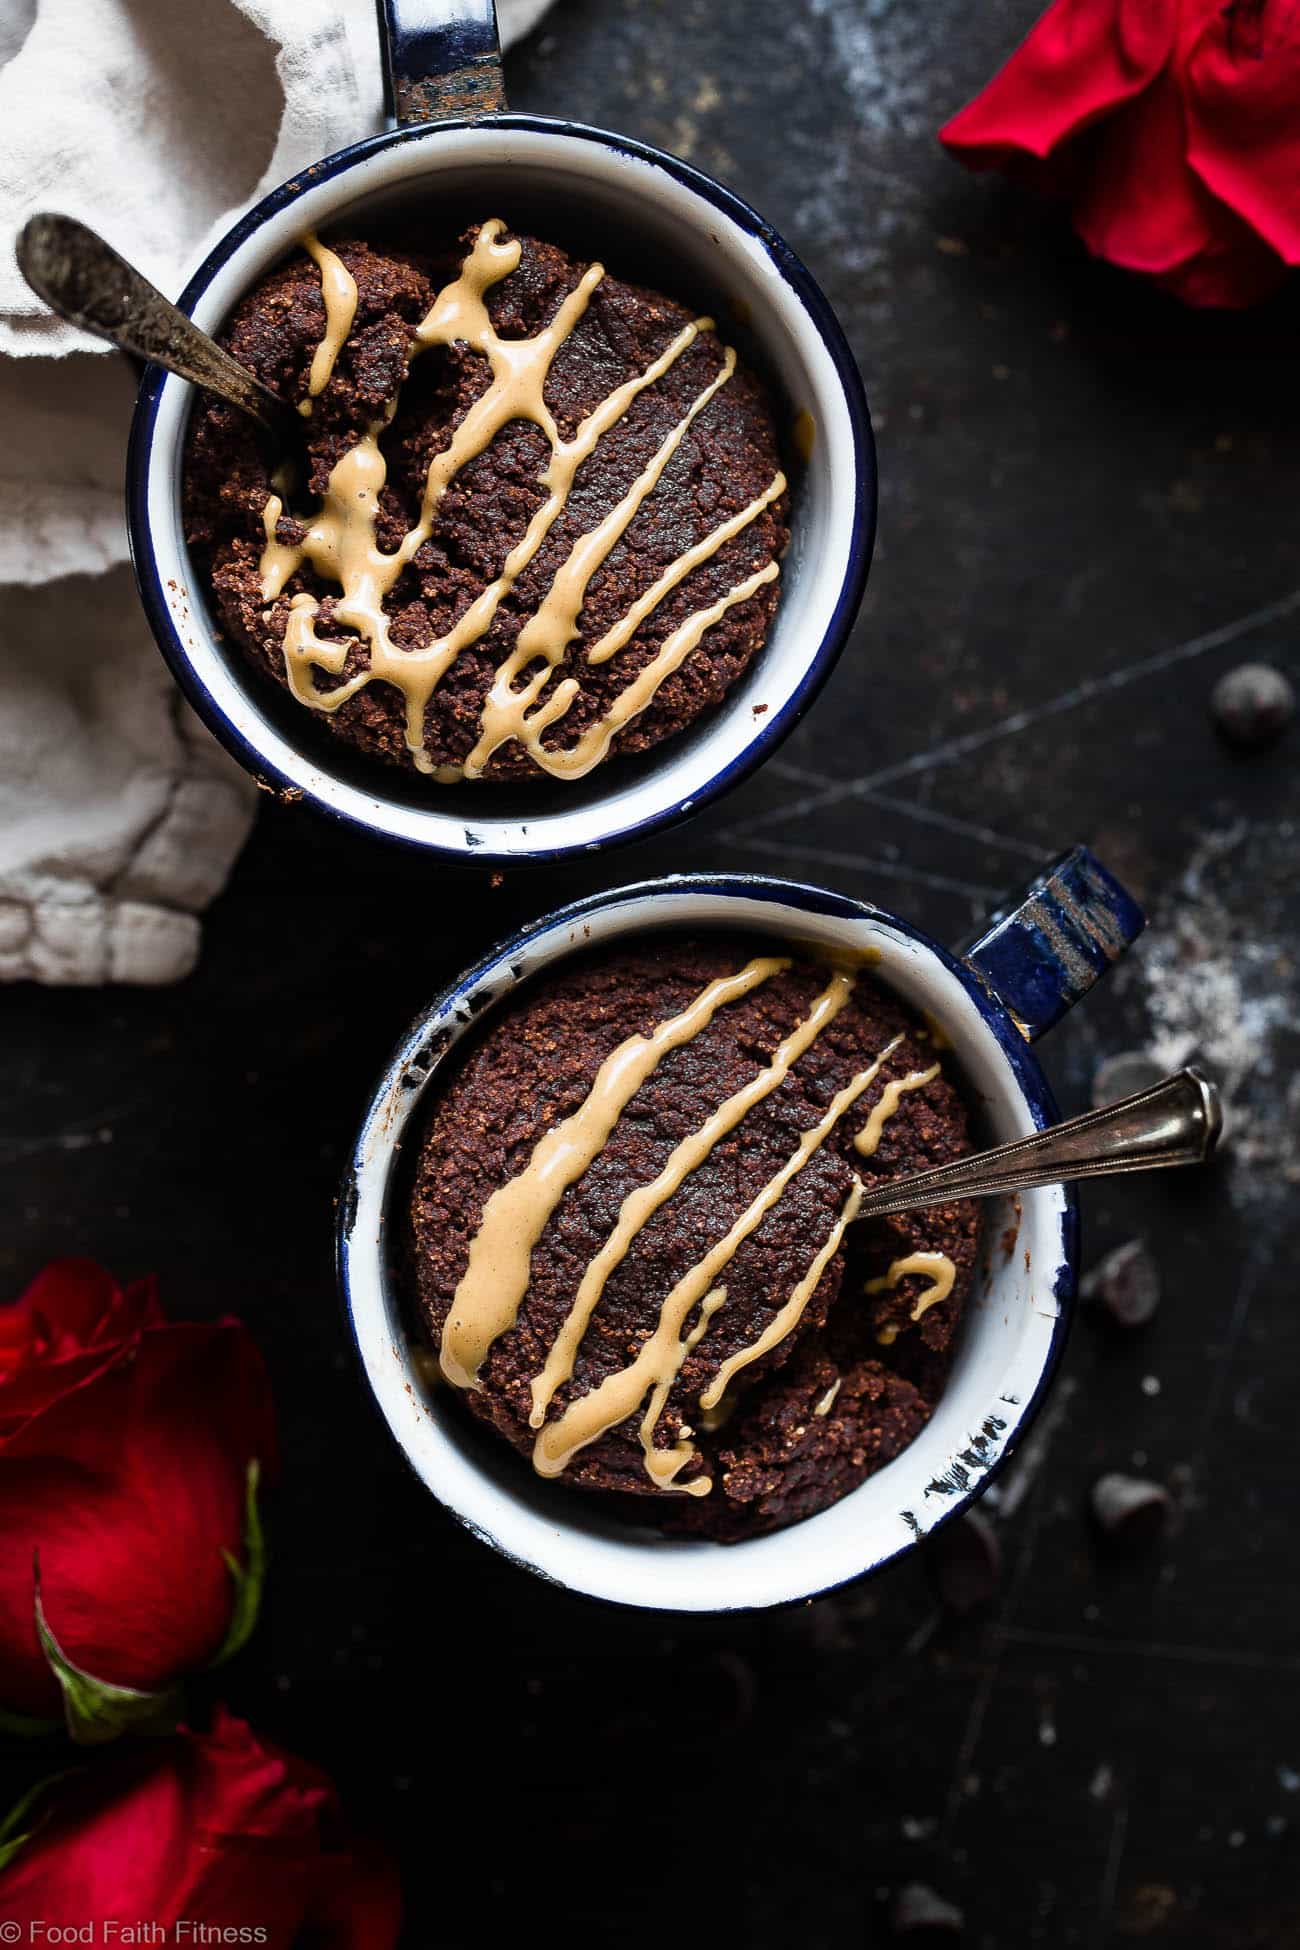 Paleo Chocolate Almond Butter Mug Cakes for Two - A gluten/grain/dairy/sugar free treat that is vegan friendly, ready in 10 minutes and better for you! A healthy dessert at its best! | #Foodfaithfitness | #paleo #vegan #glutenfree #mugcake #chocolate